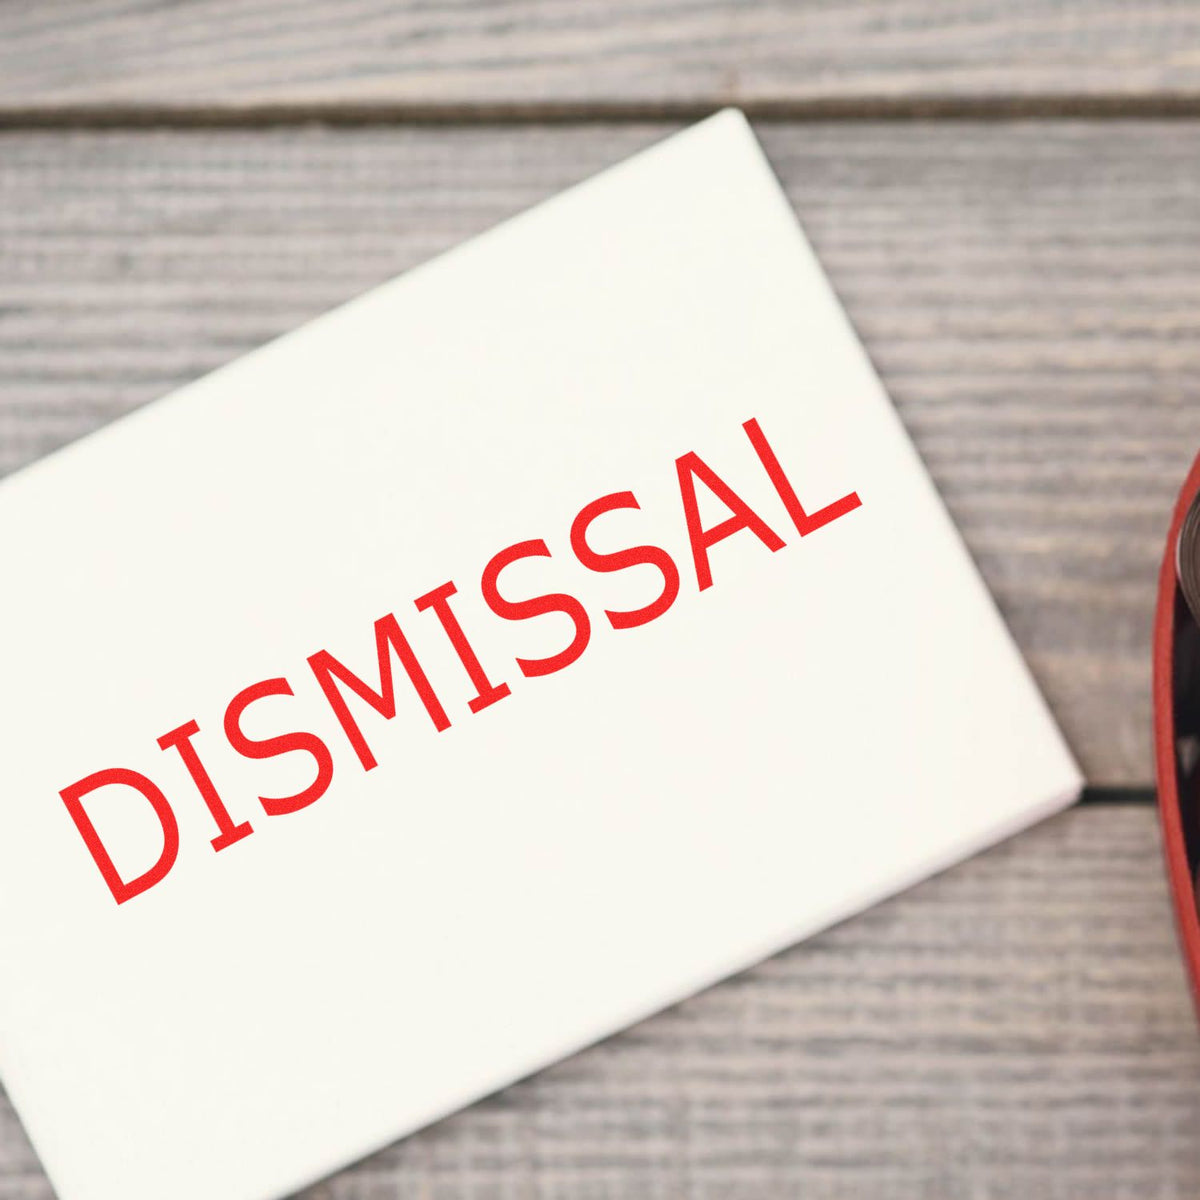 Large Dismissal Rubber Stamp In Use Photo